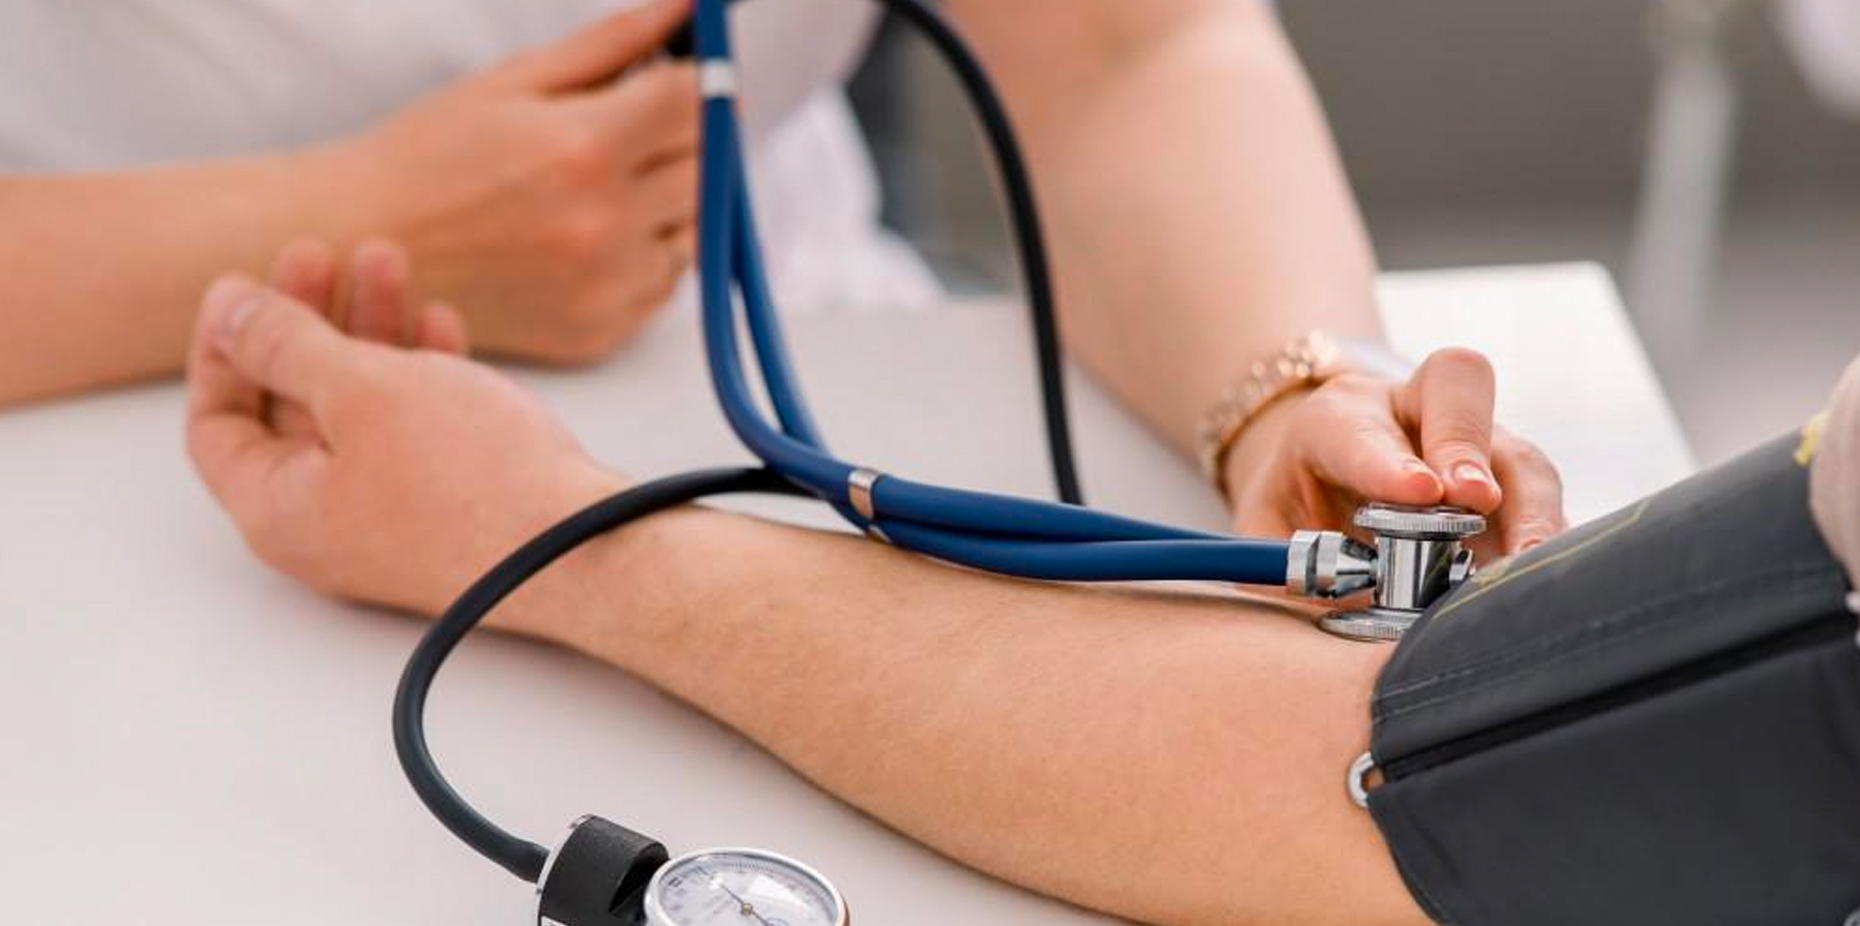 High Blood Pressure (Hypertension): Types, Causes, Symptoms, and More